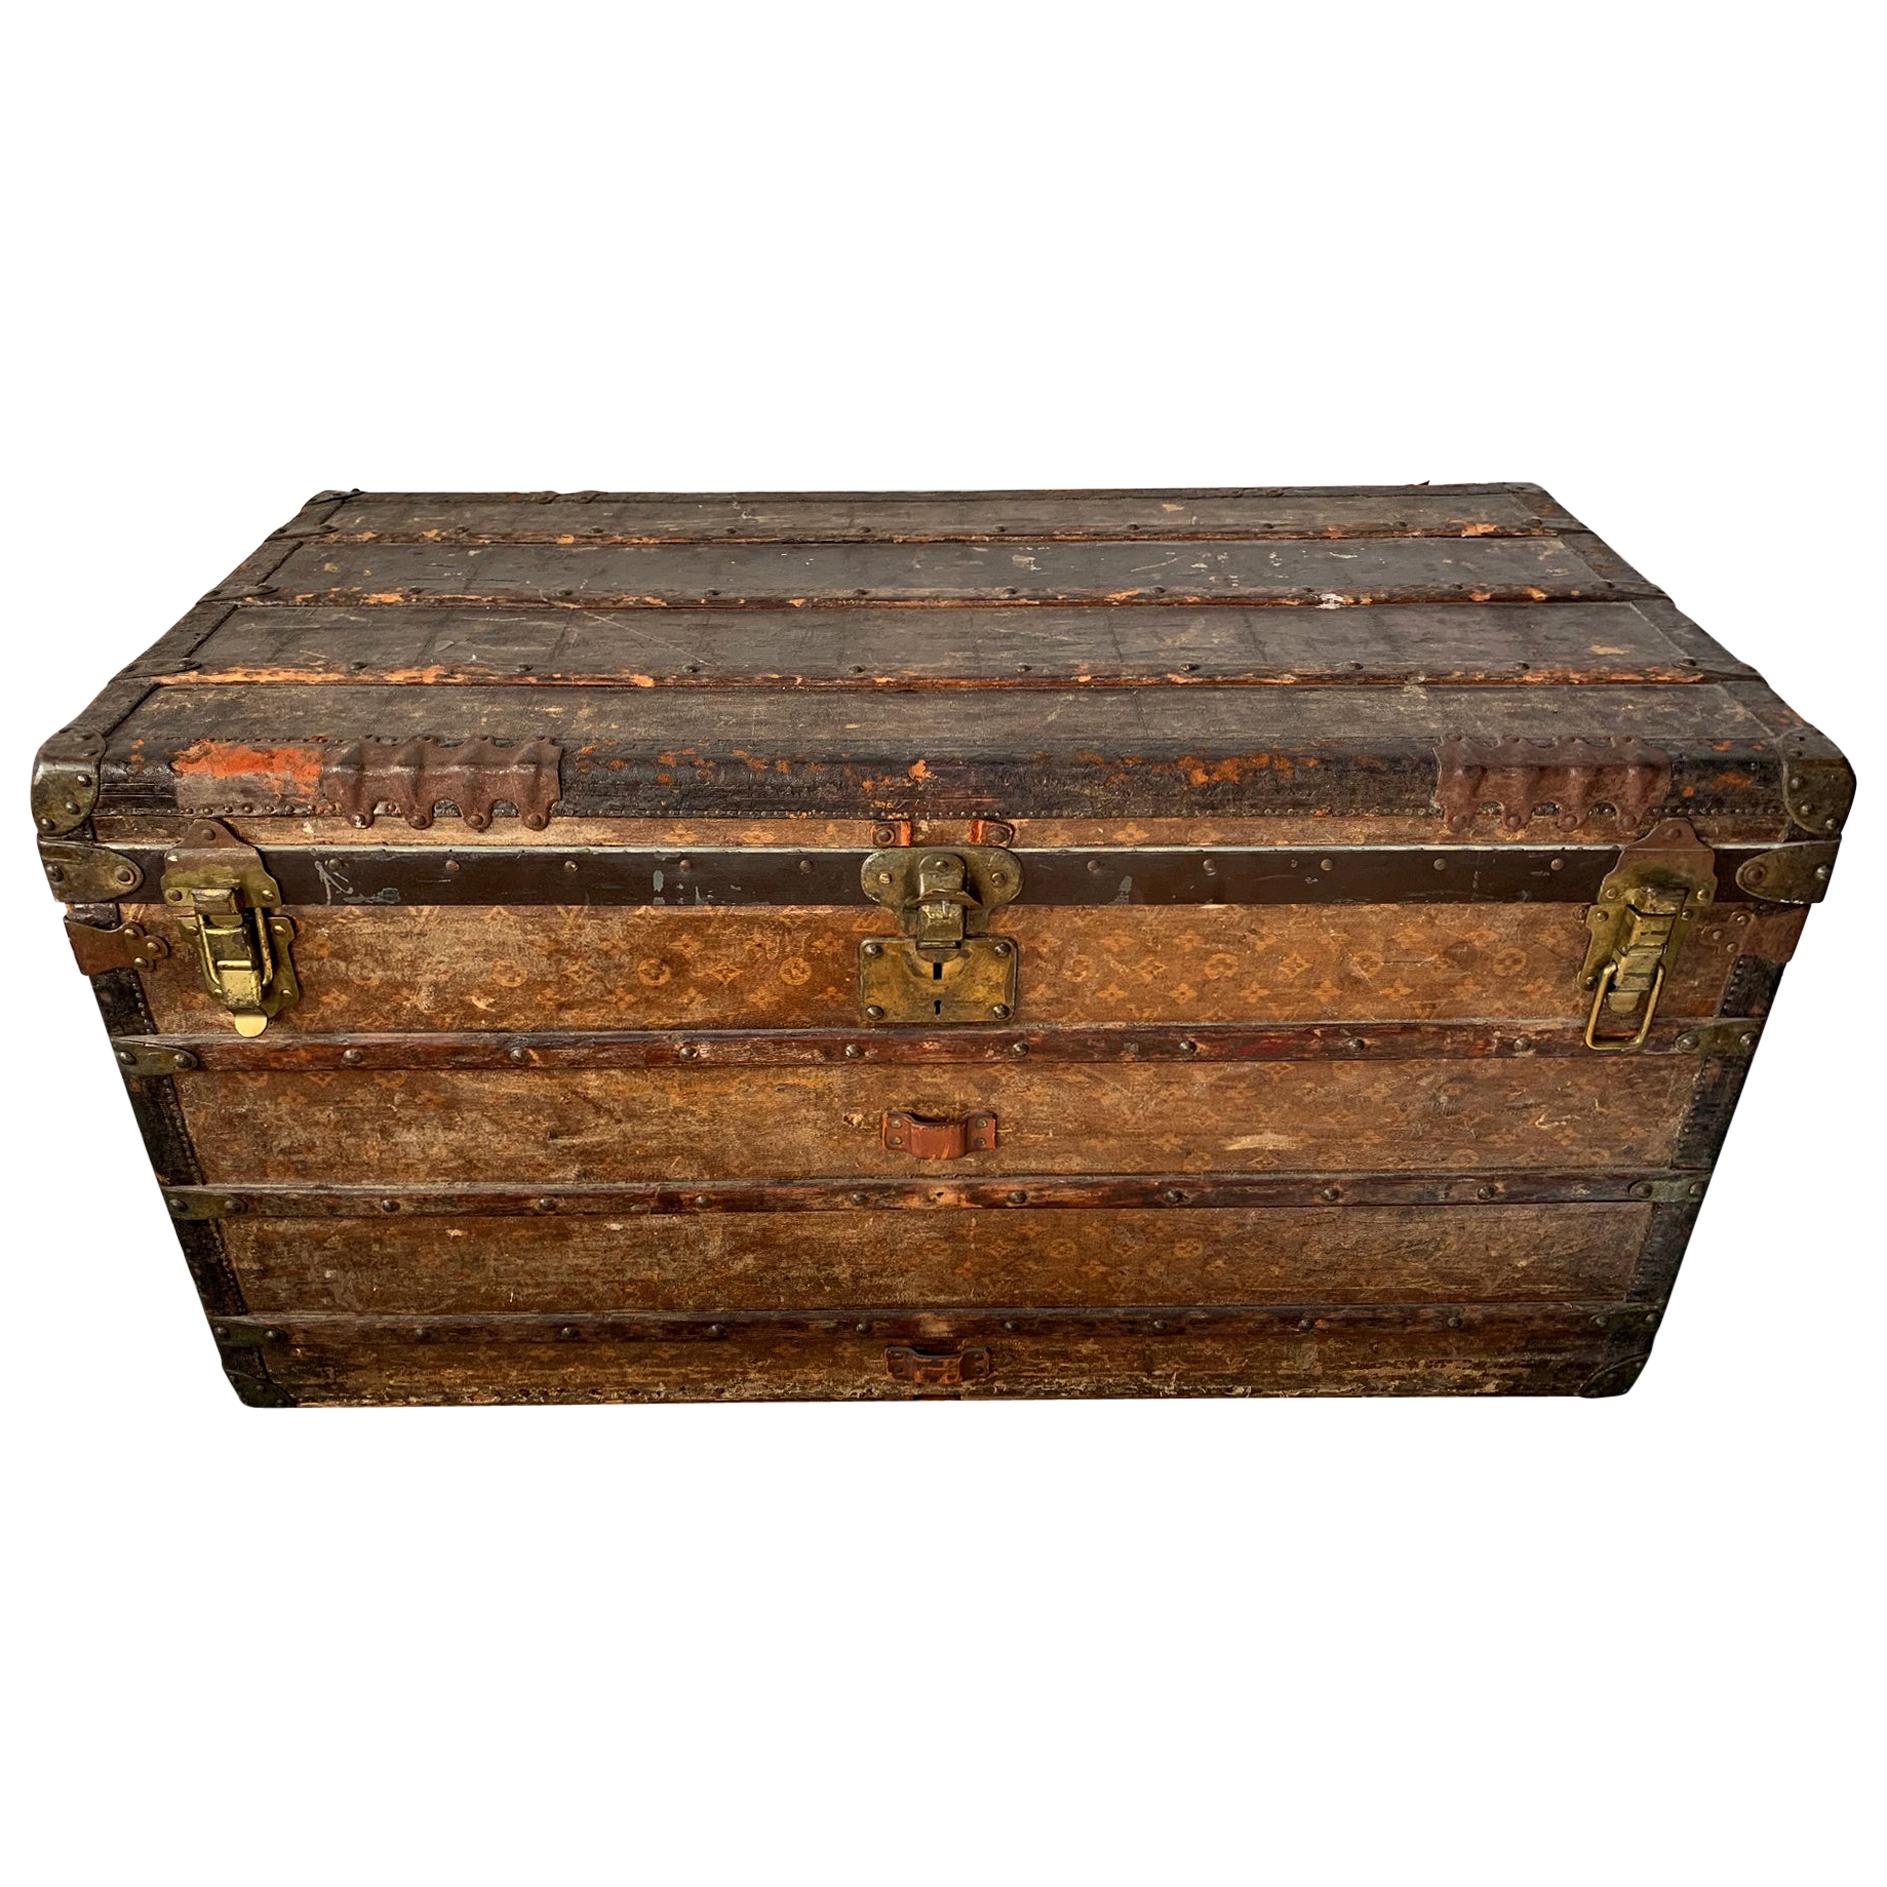 Early Historically Important Vintage Louis Vuitton Steamer Trunk at 1stDibs   vintage louis vuitton trunk, antique louis vuitton trunk, louis vuitton  trunk serial number lookup